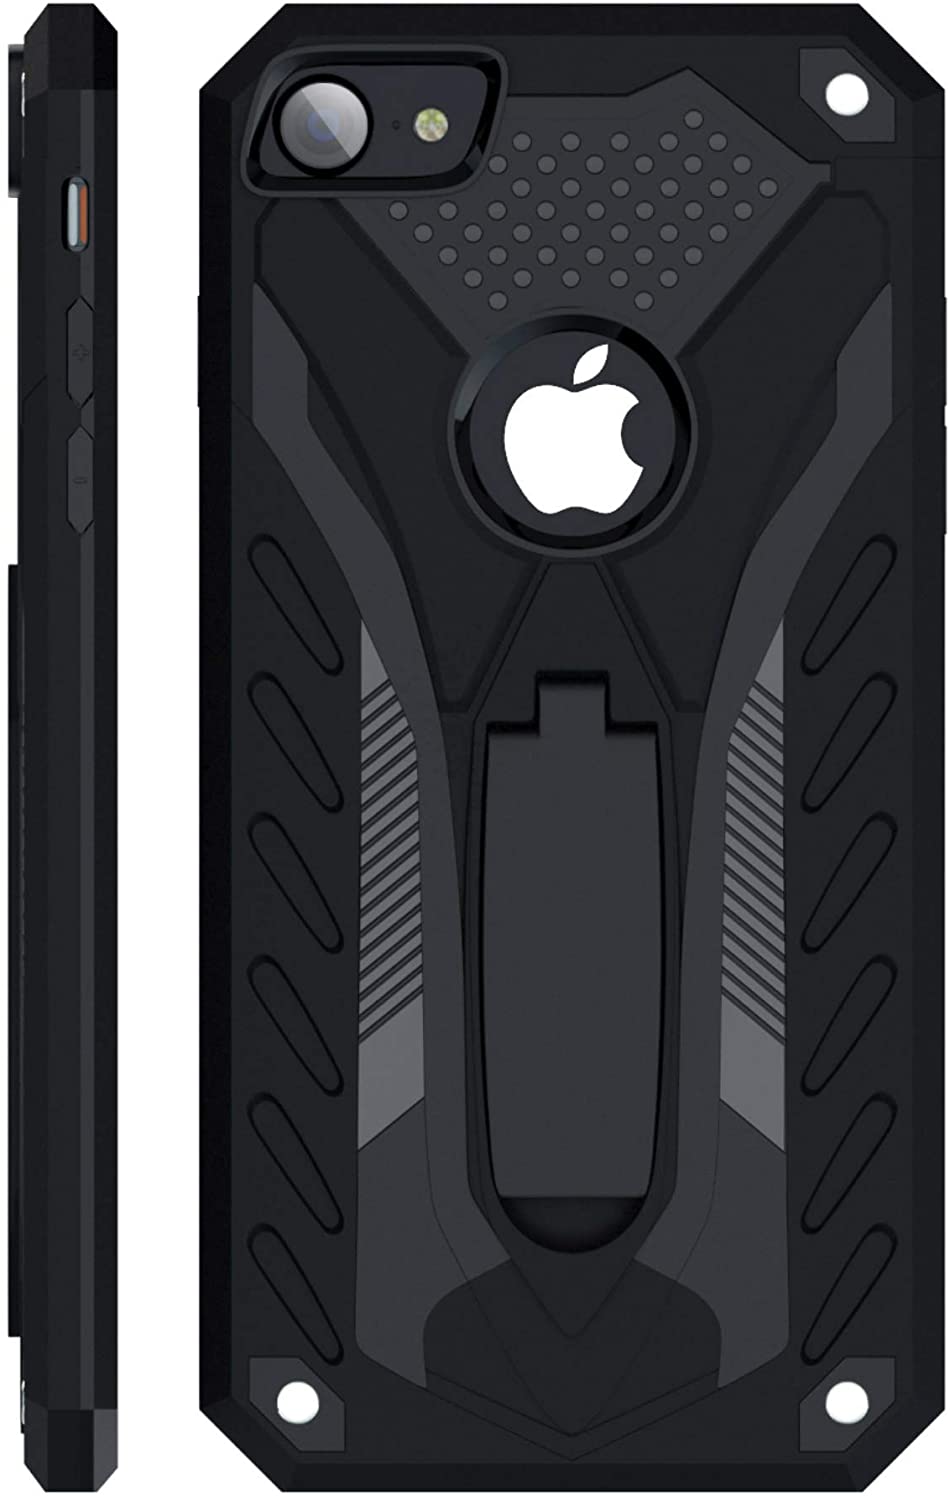 iPhone 7 / iPhone 8 Hard Case with Kickstand Black